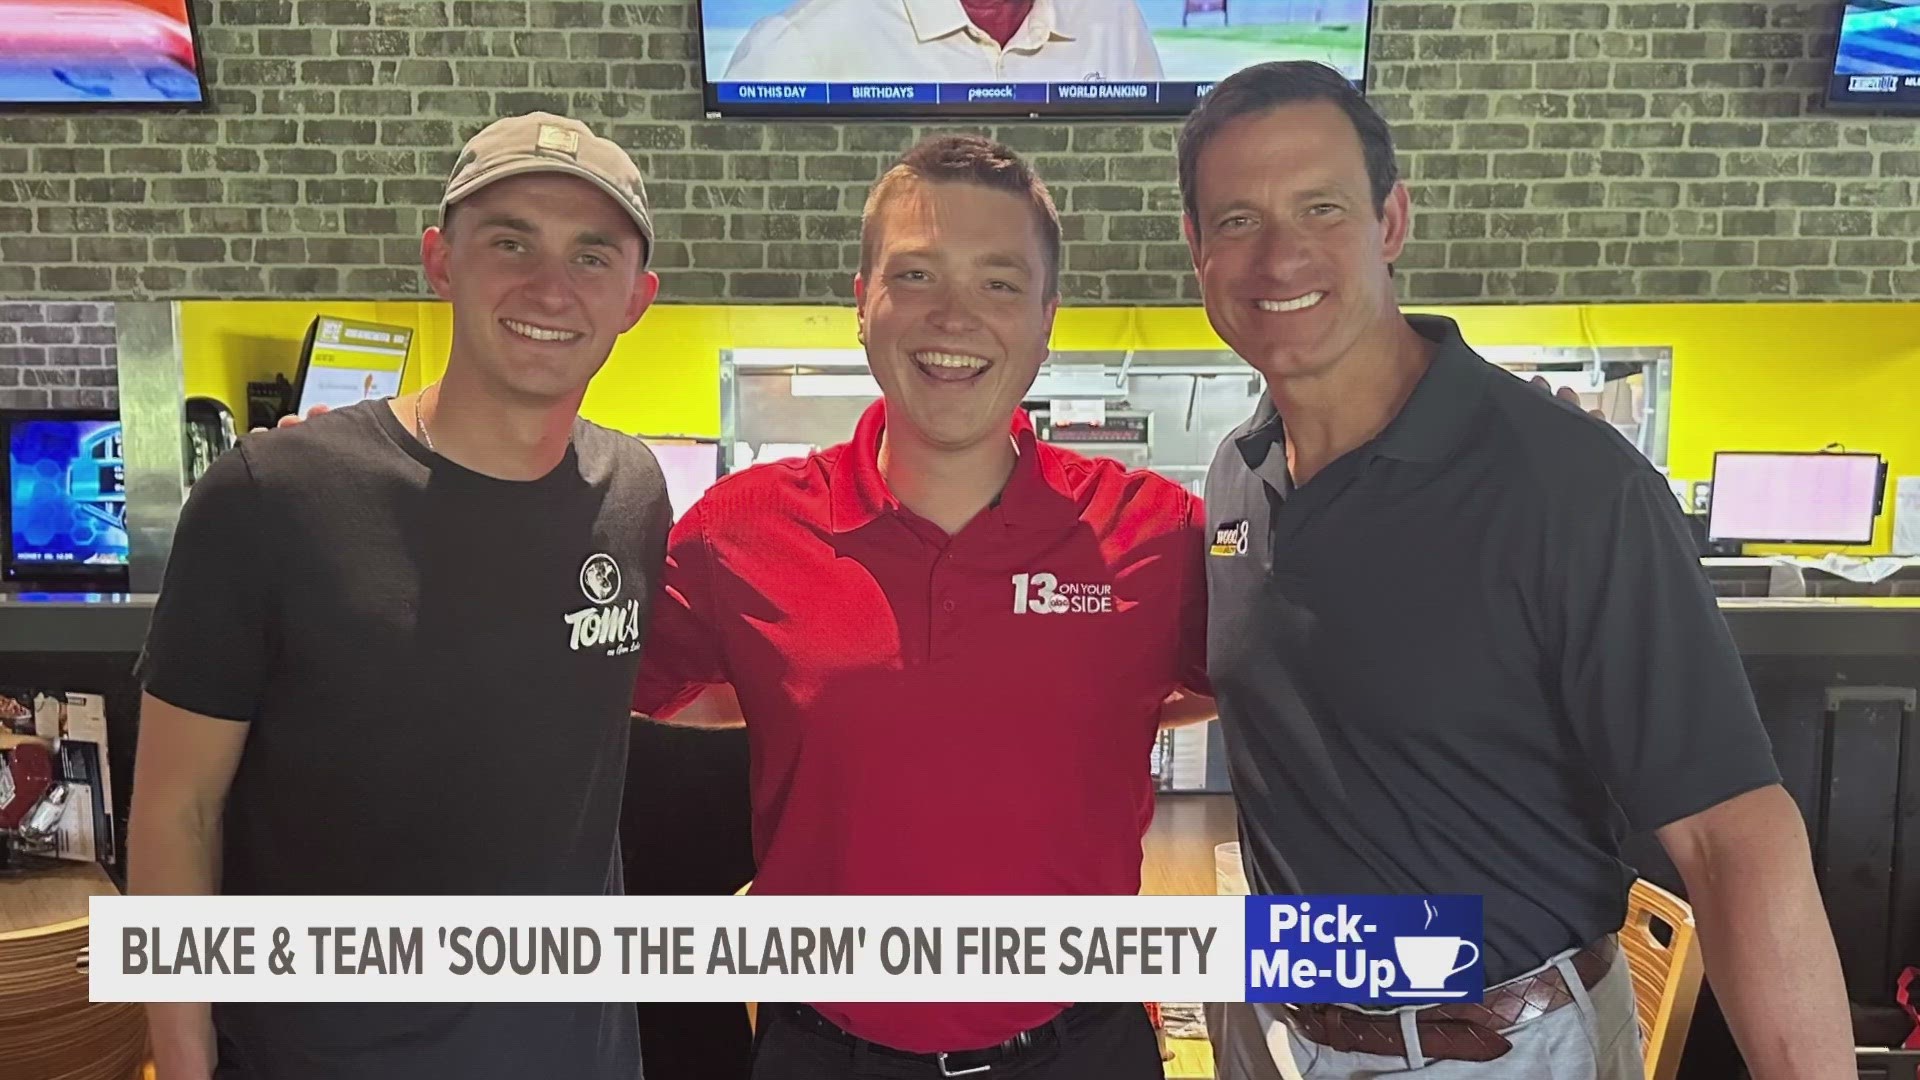 Blake participated in the "Sound the Alarm" challenge, where he helped raise money for fire safety and took down five super-spicy wings.